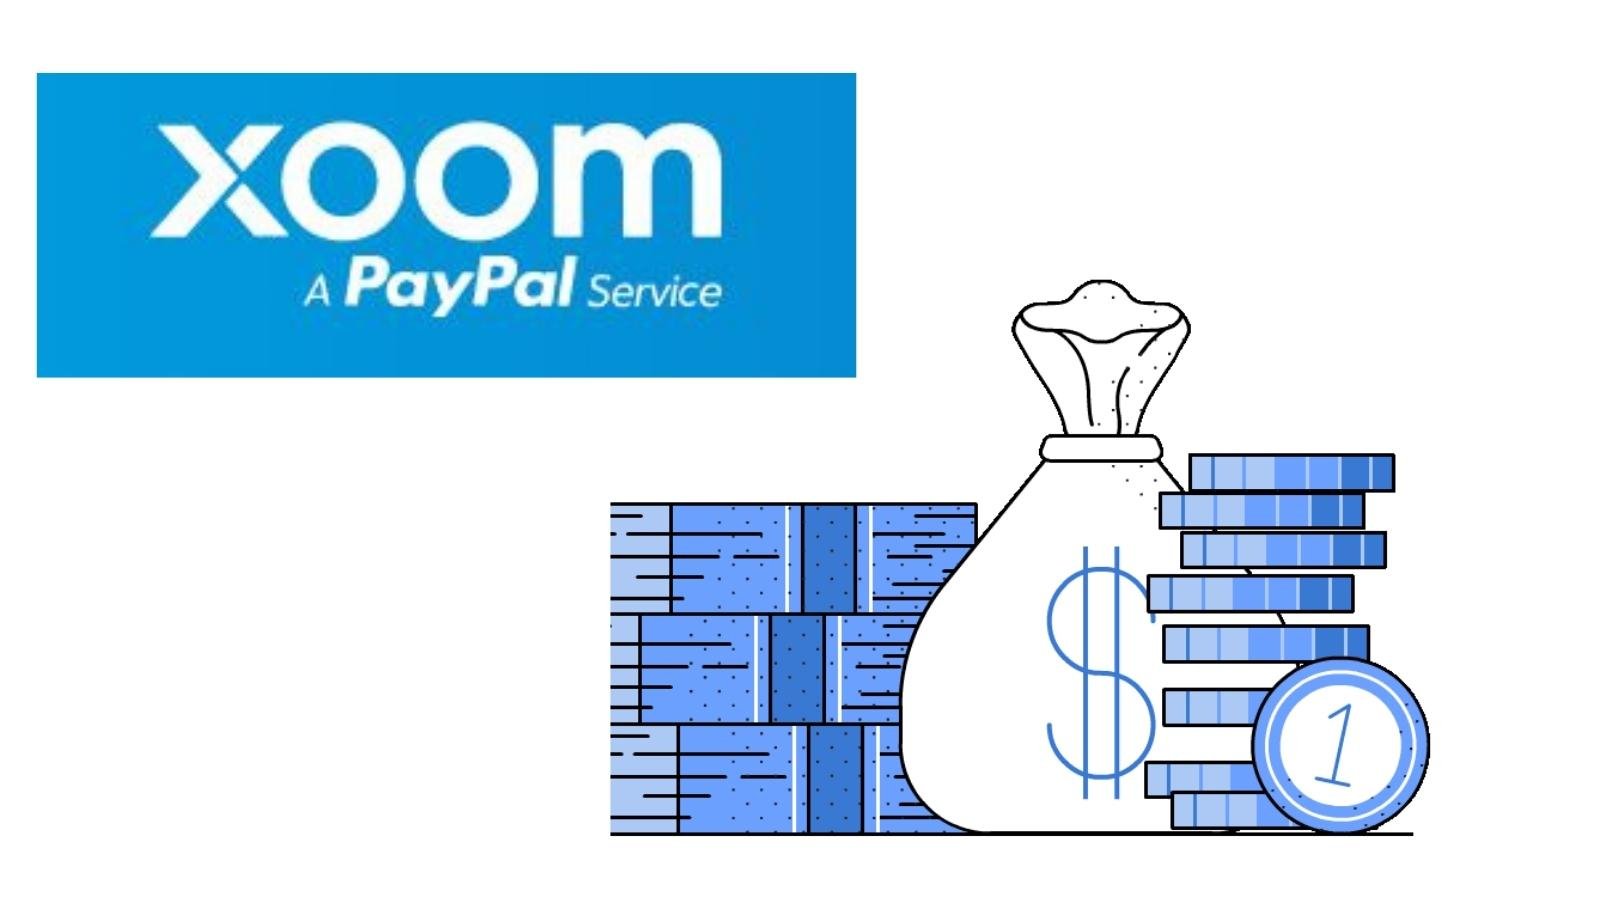 Xoom for international payments